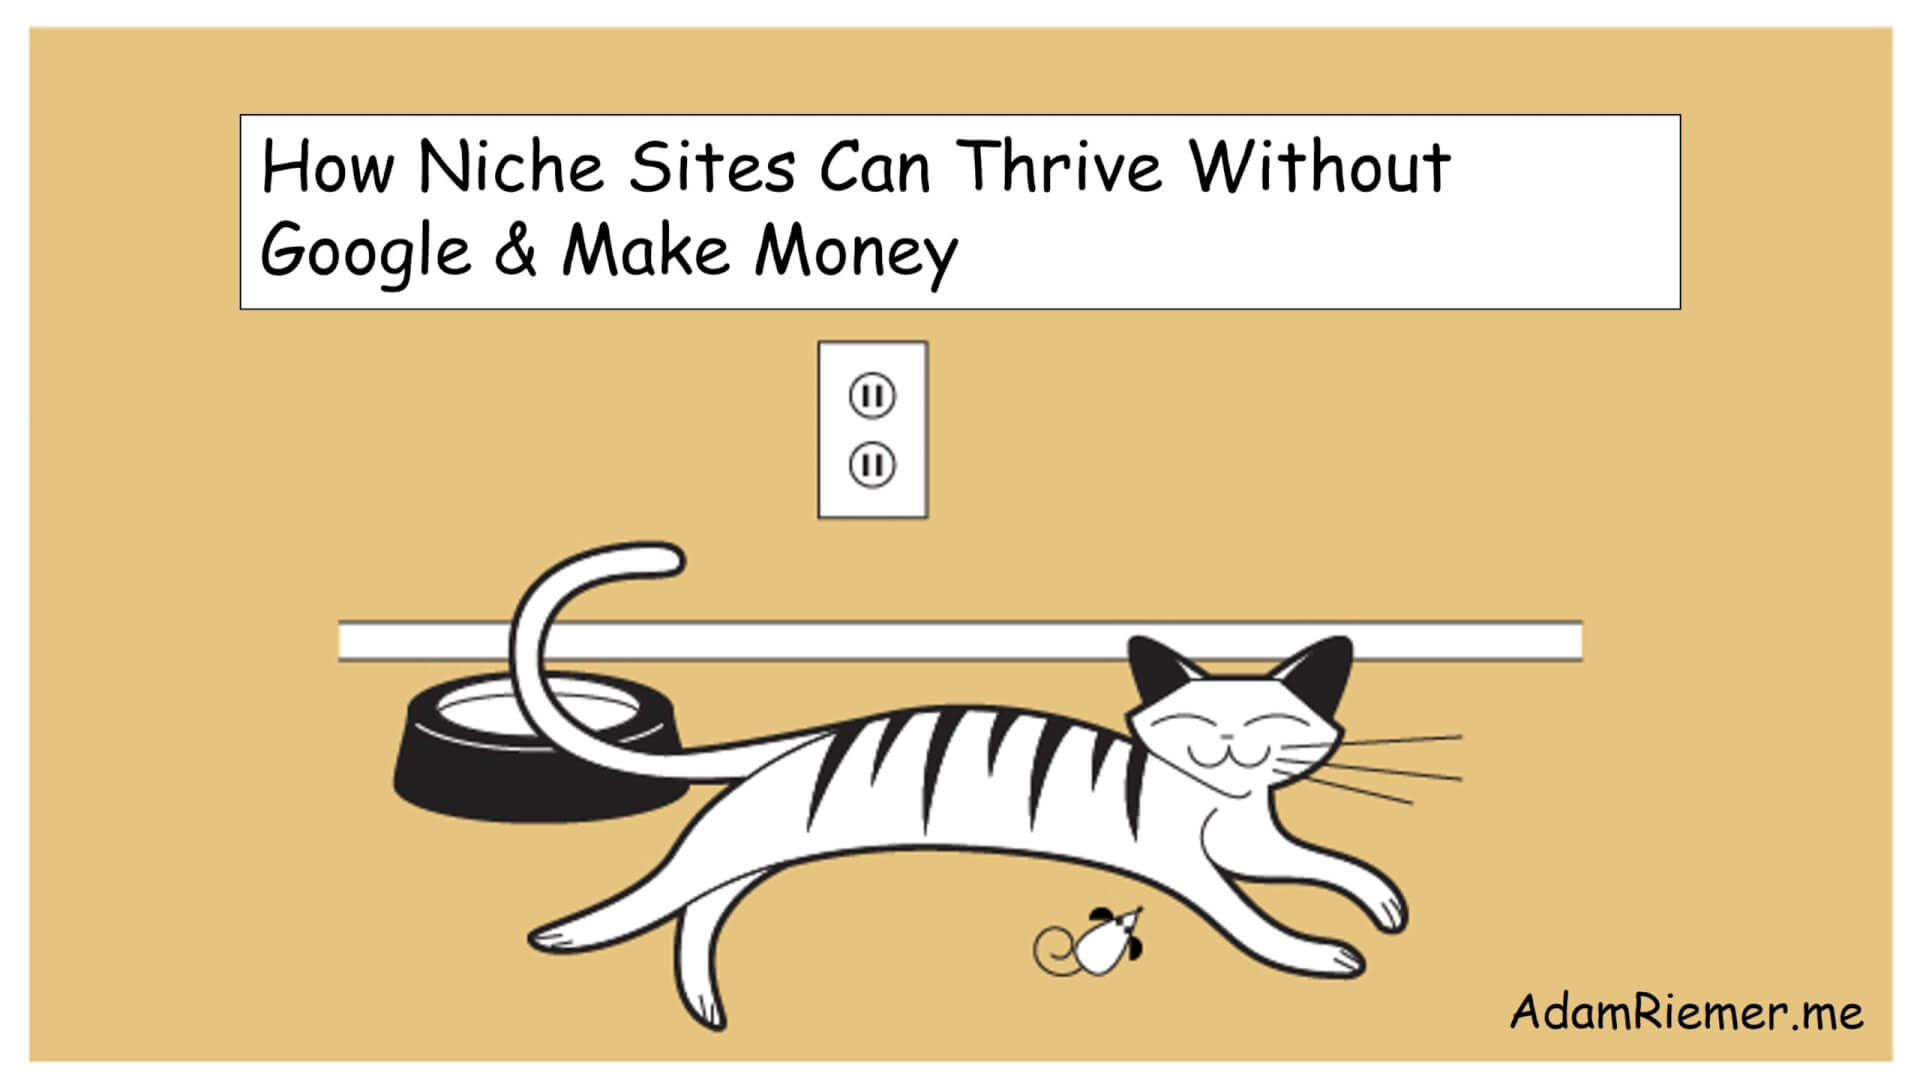 How Niche Sites Thrive Without Google & Make Money